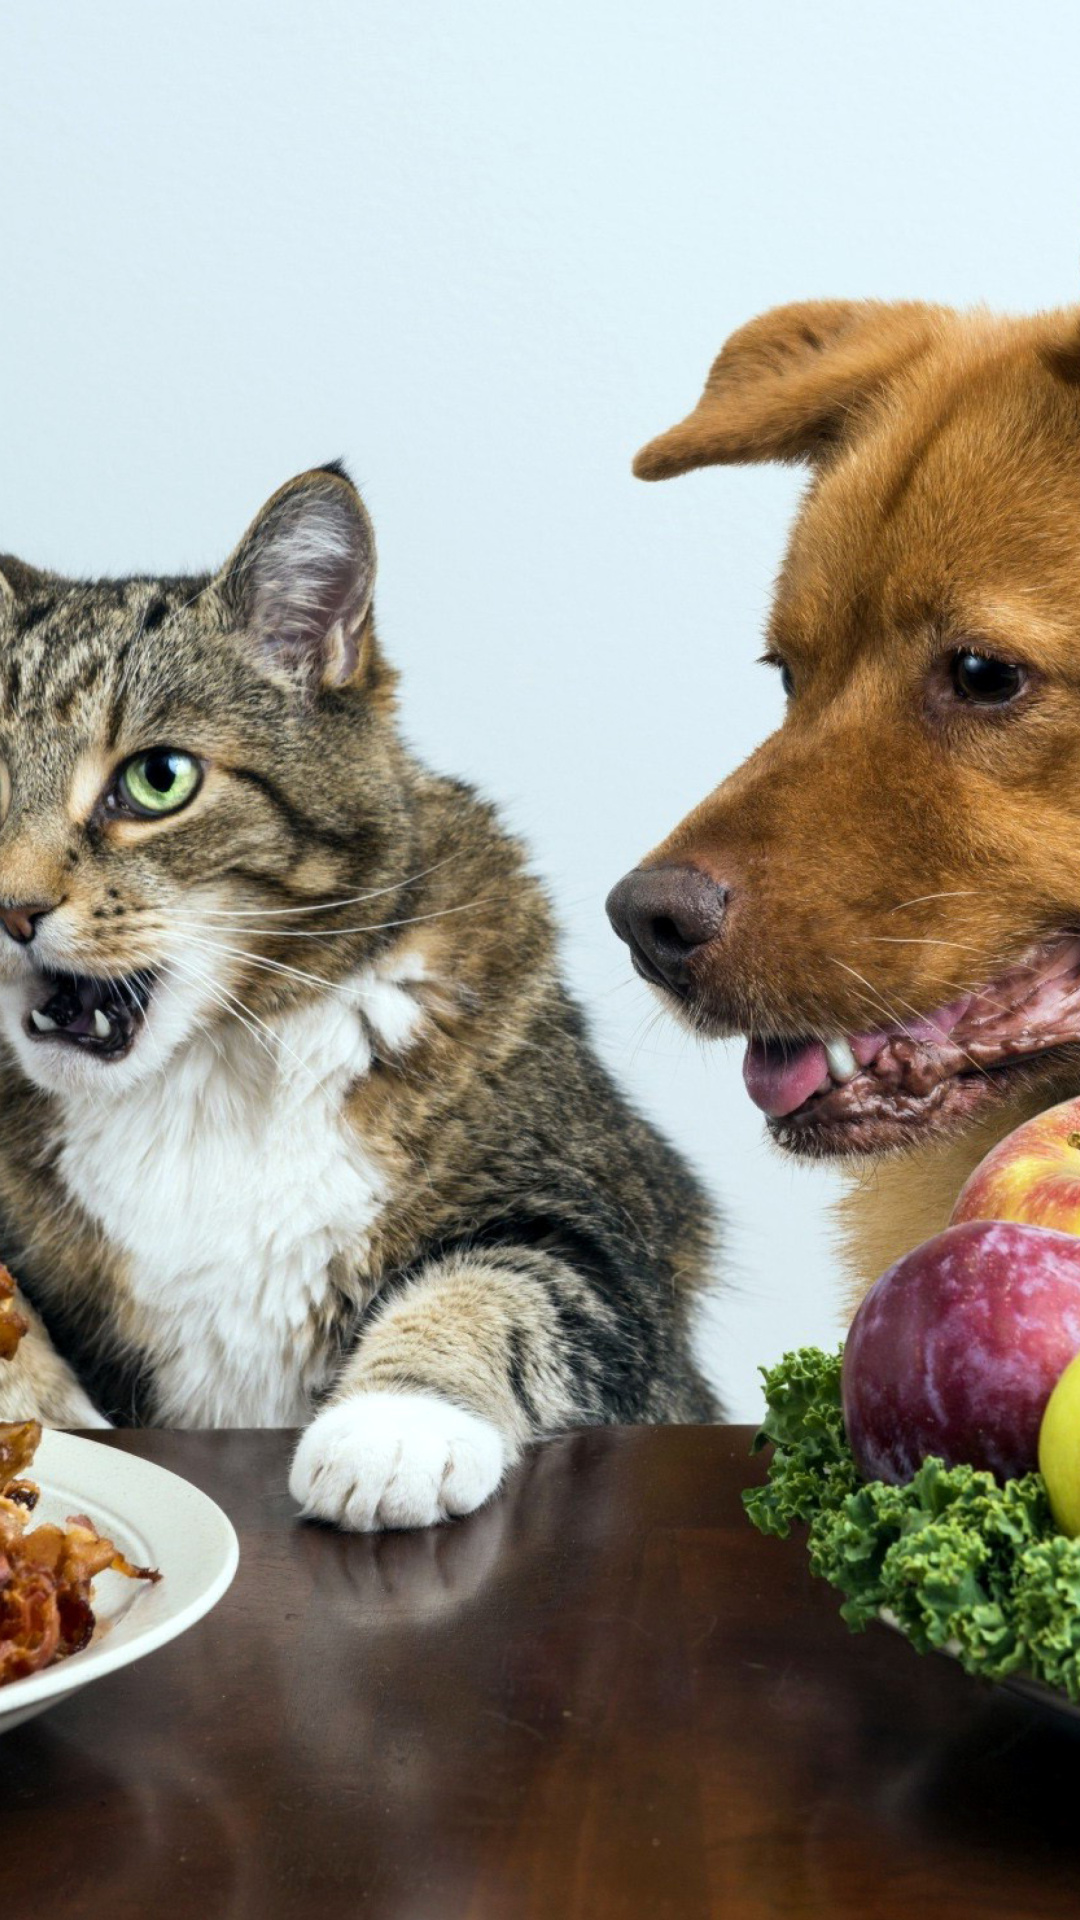 Dog and Cat Dinner wallpaper 1080x1920